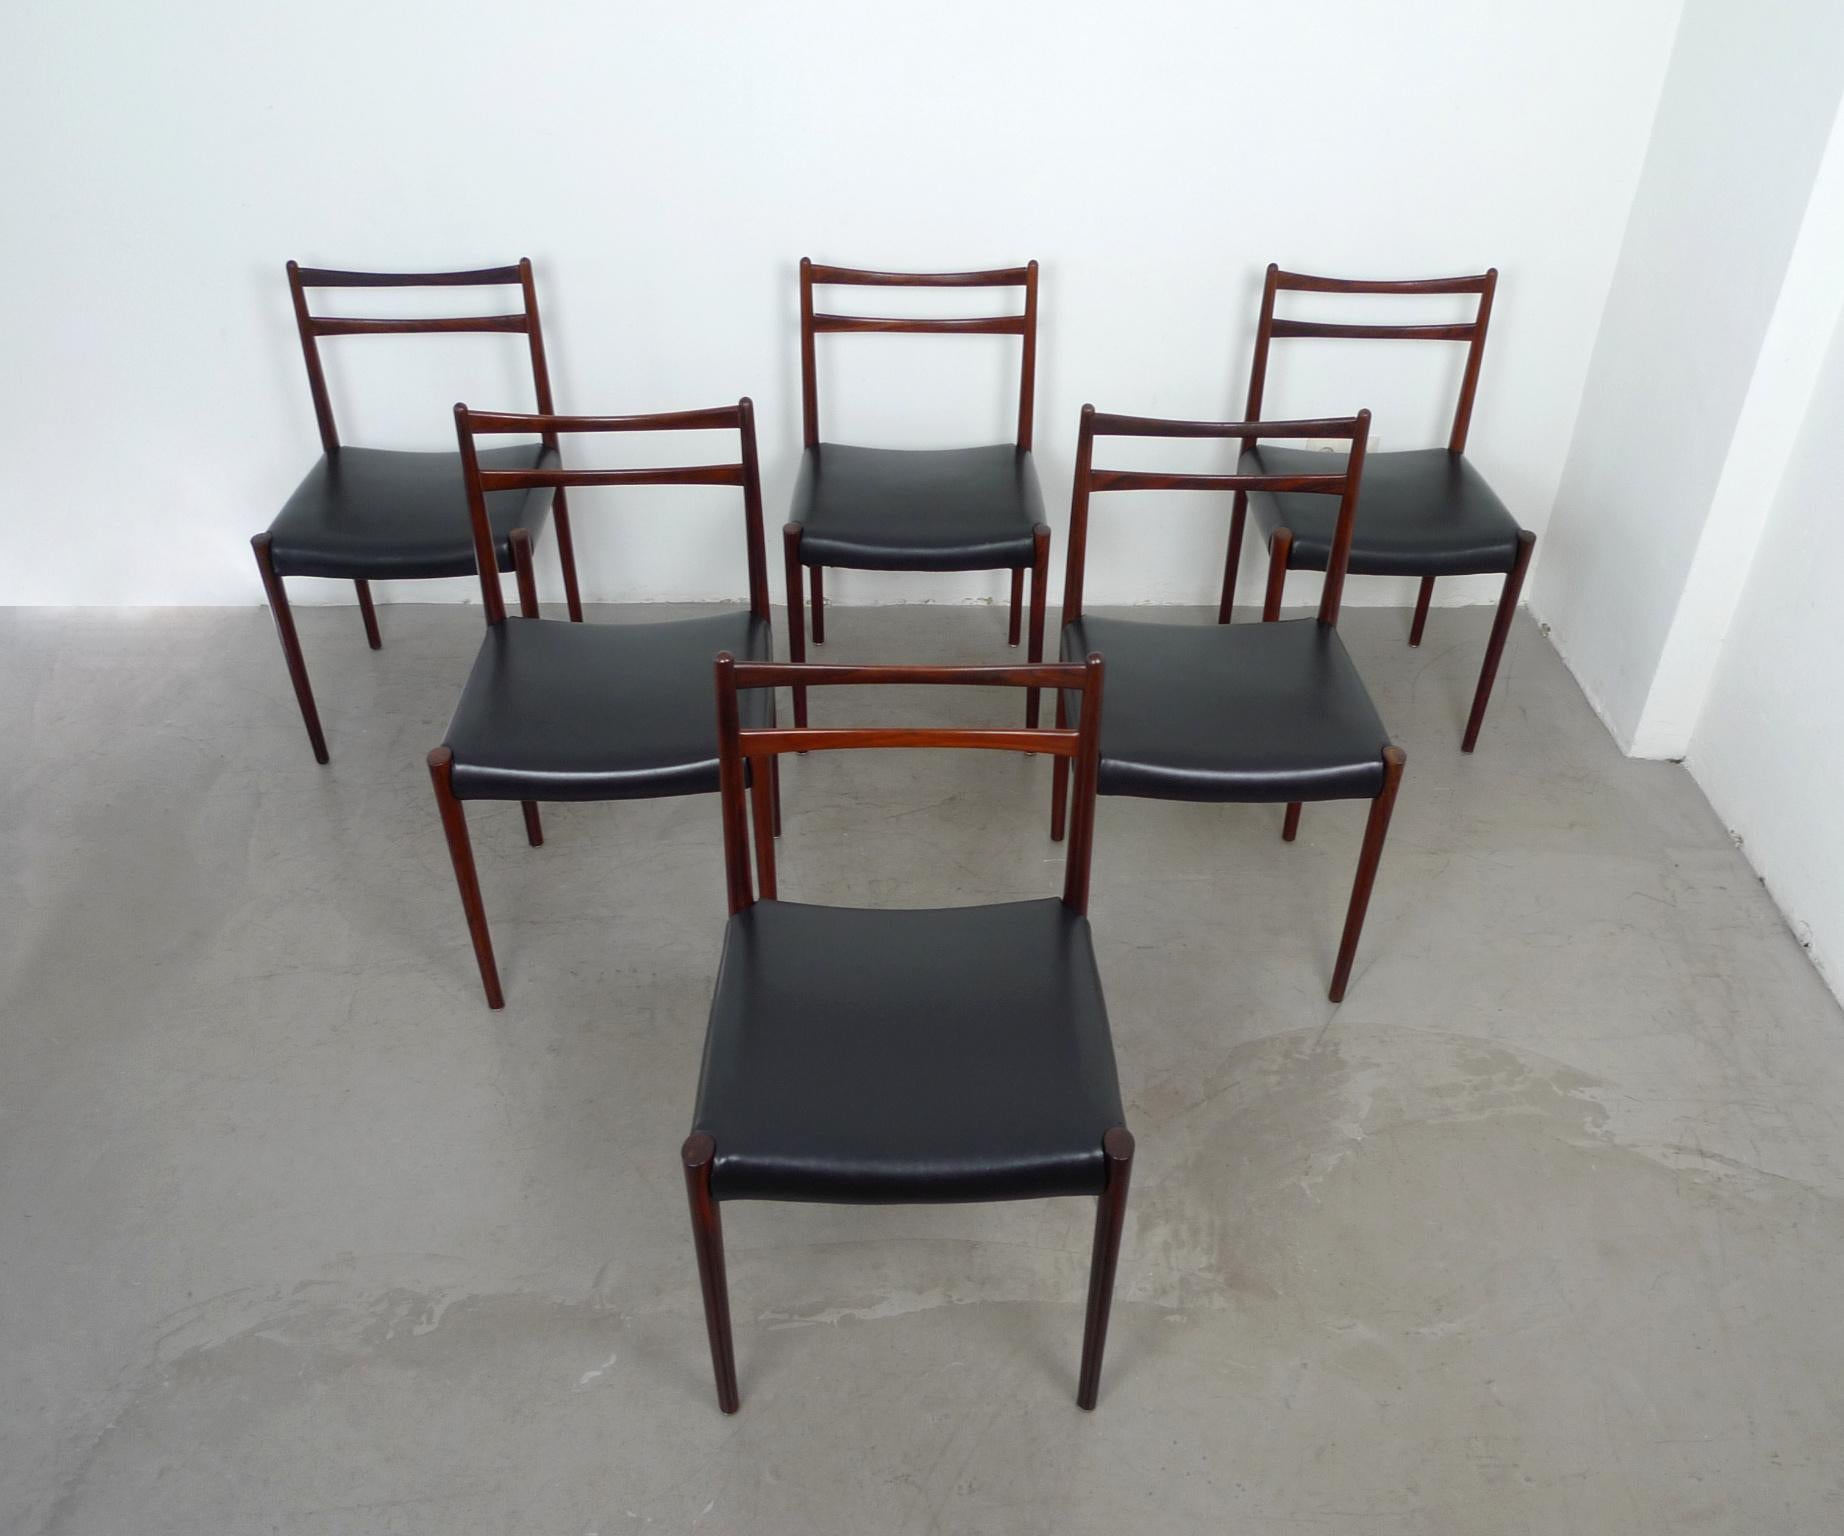 This set of six dining chairs was produced in Denmark in the 1960s. The graceful frames are made of rosewood and the seats are covered with black leatherette. The chairs are in good original condition, but the seats show small scratches.